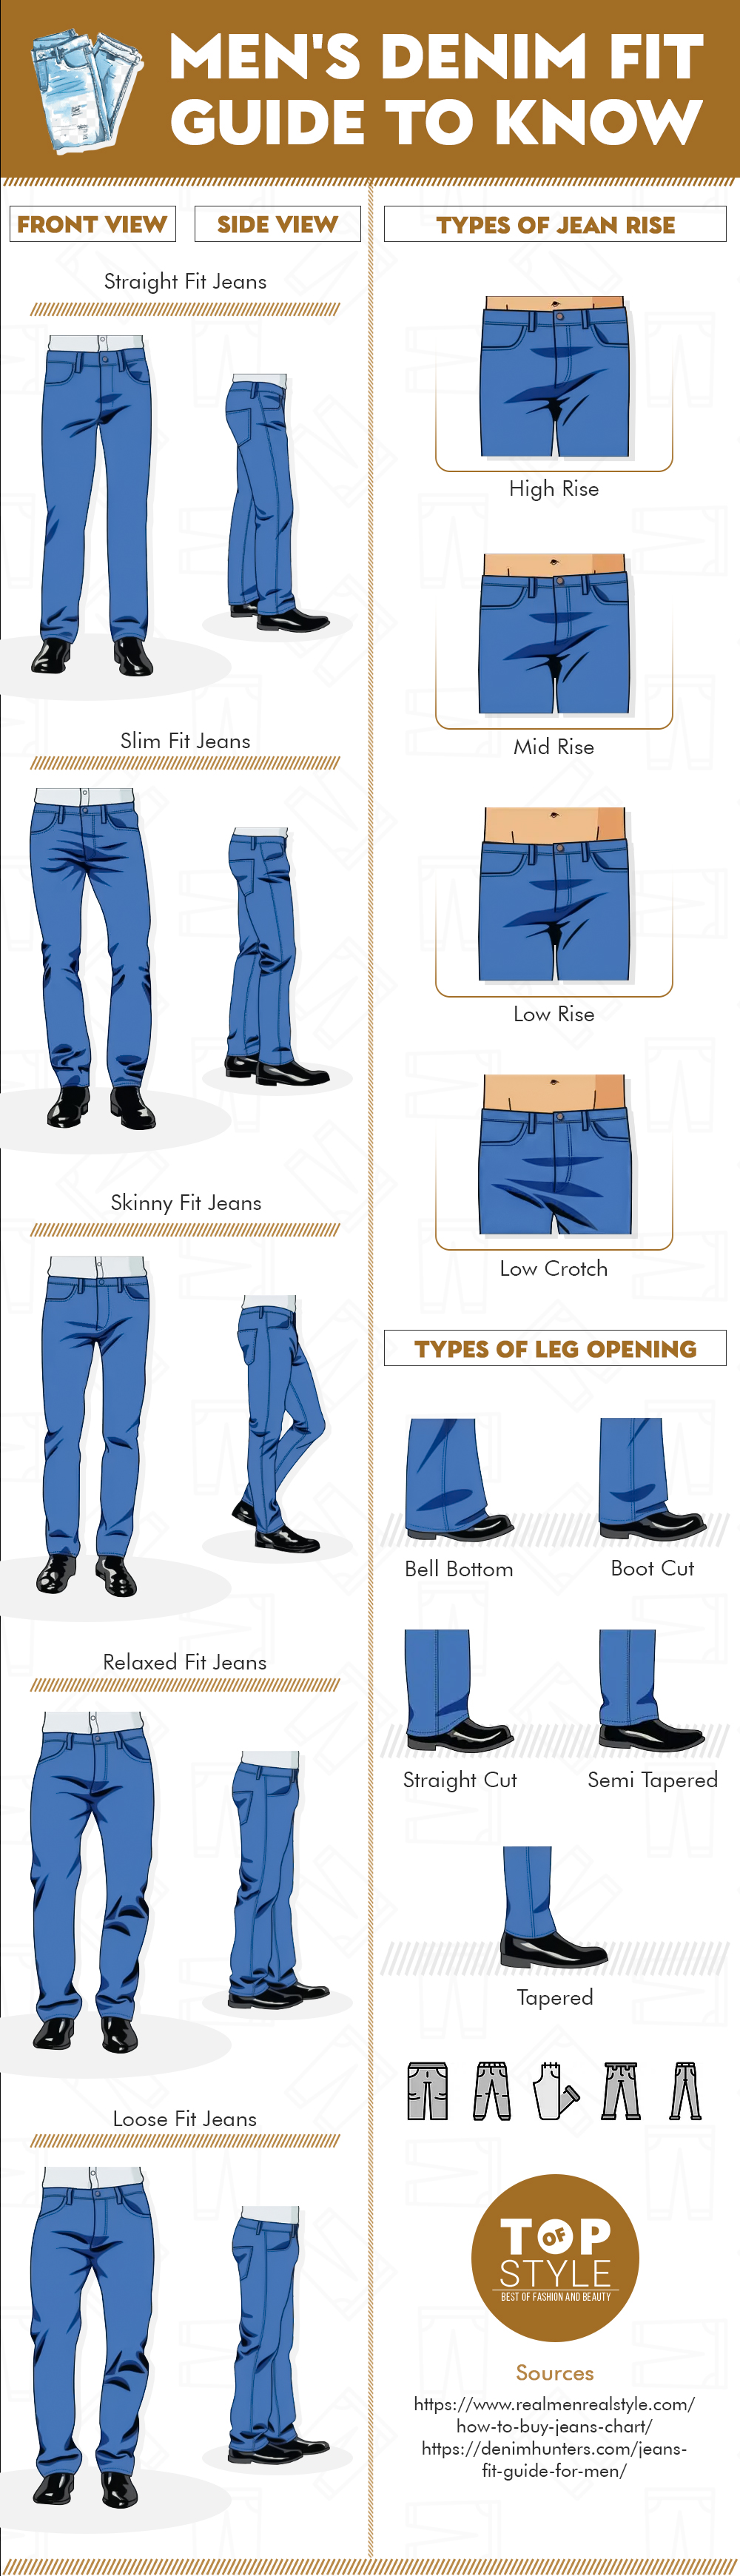 Men's Fashion Style: What to Wear With & When - A Complete Clothing ...